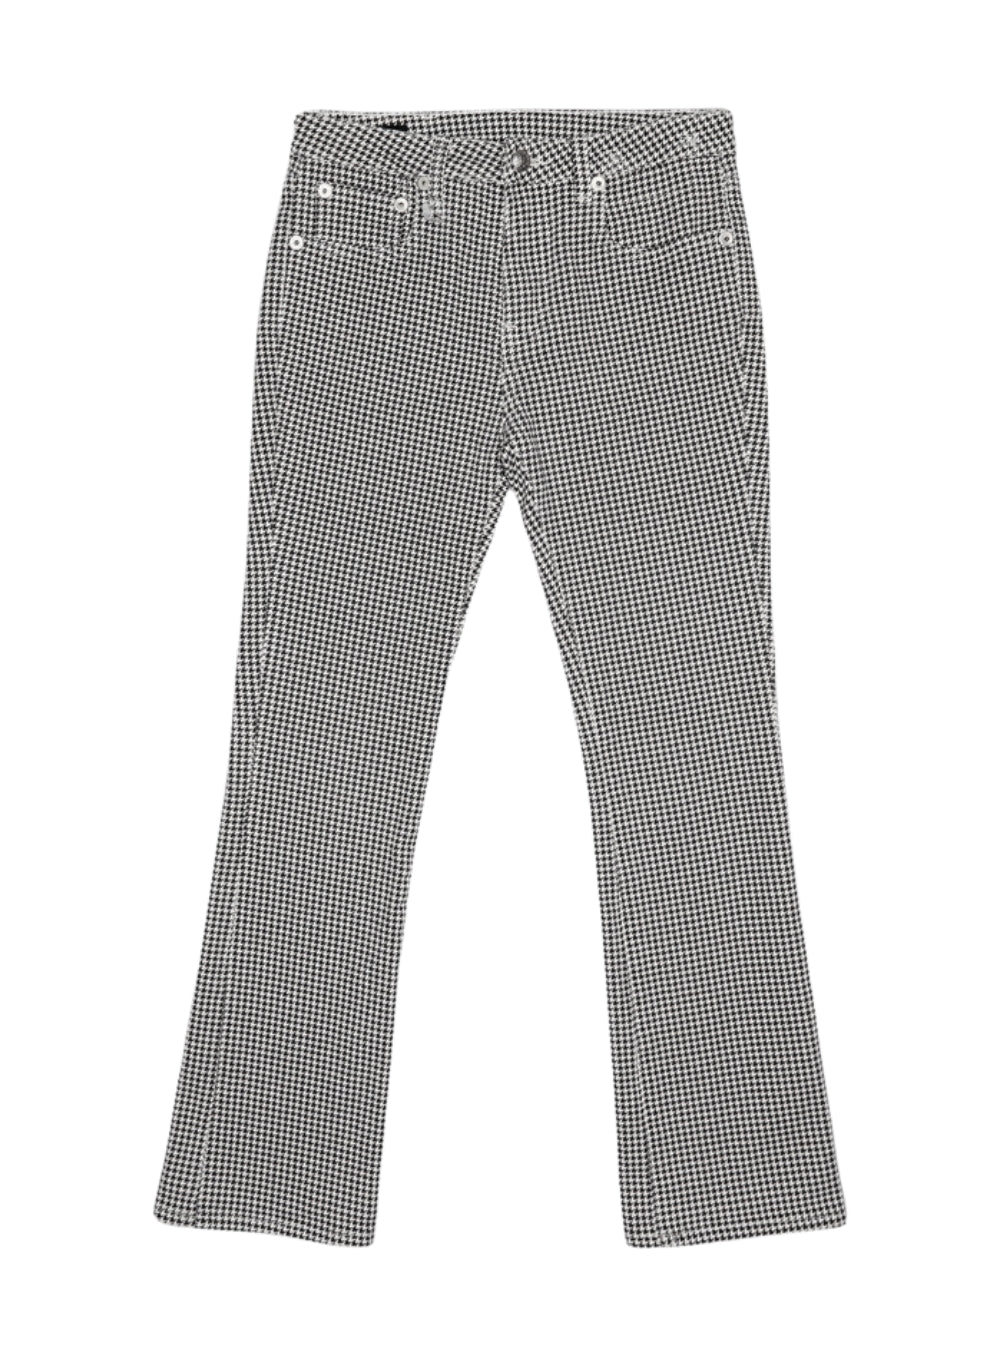 R13 | Kick Fit Jean in Houndstooth